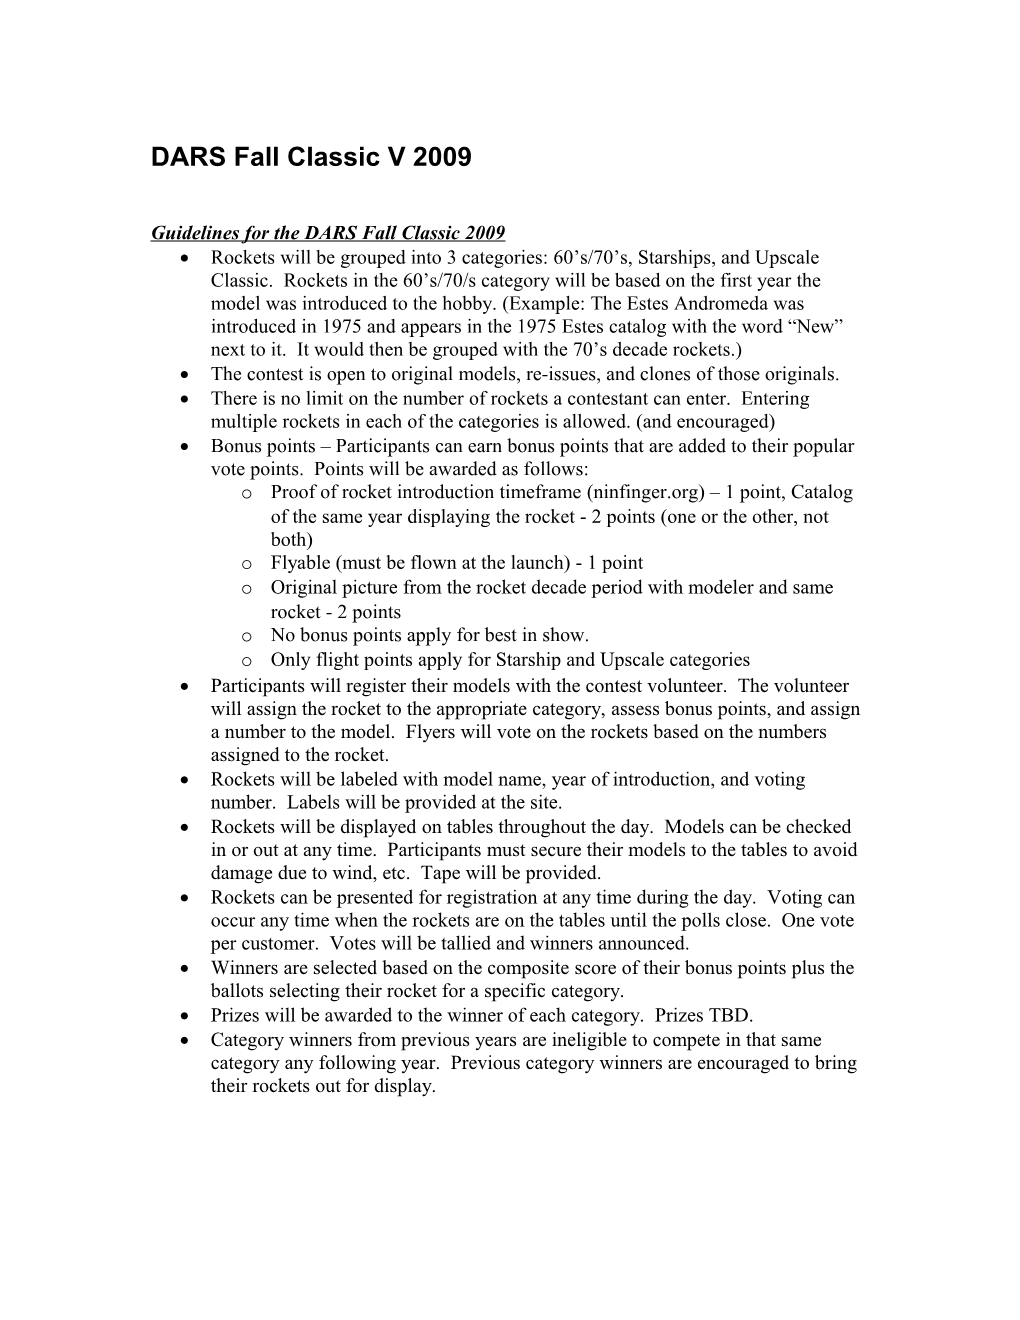 Rules, Operating Procedures and Events for the DARS Fall Classic